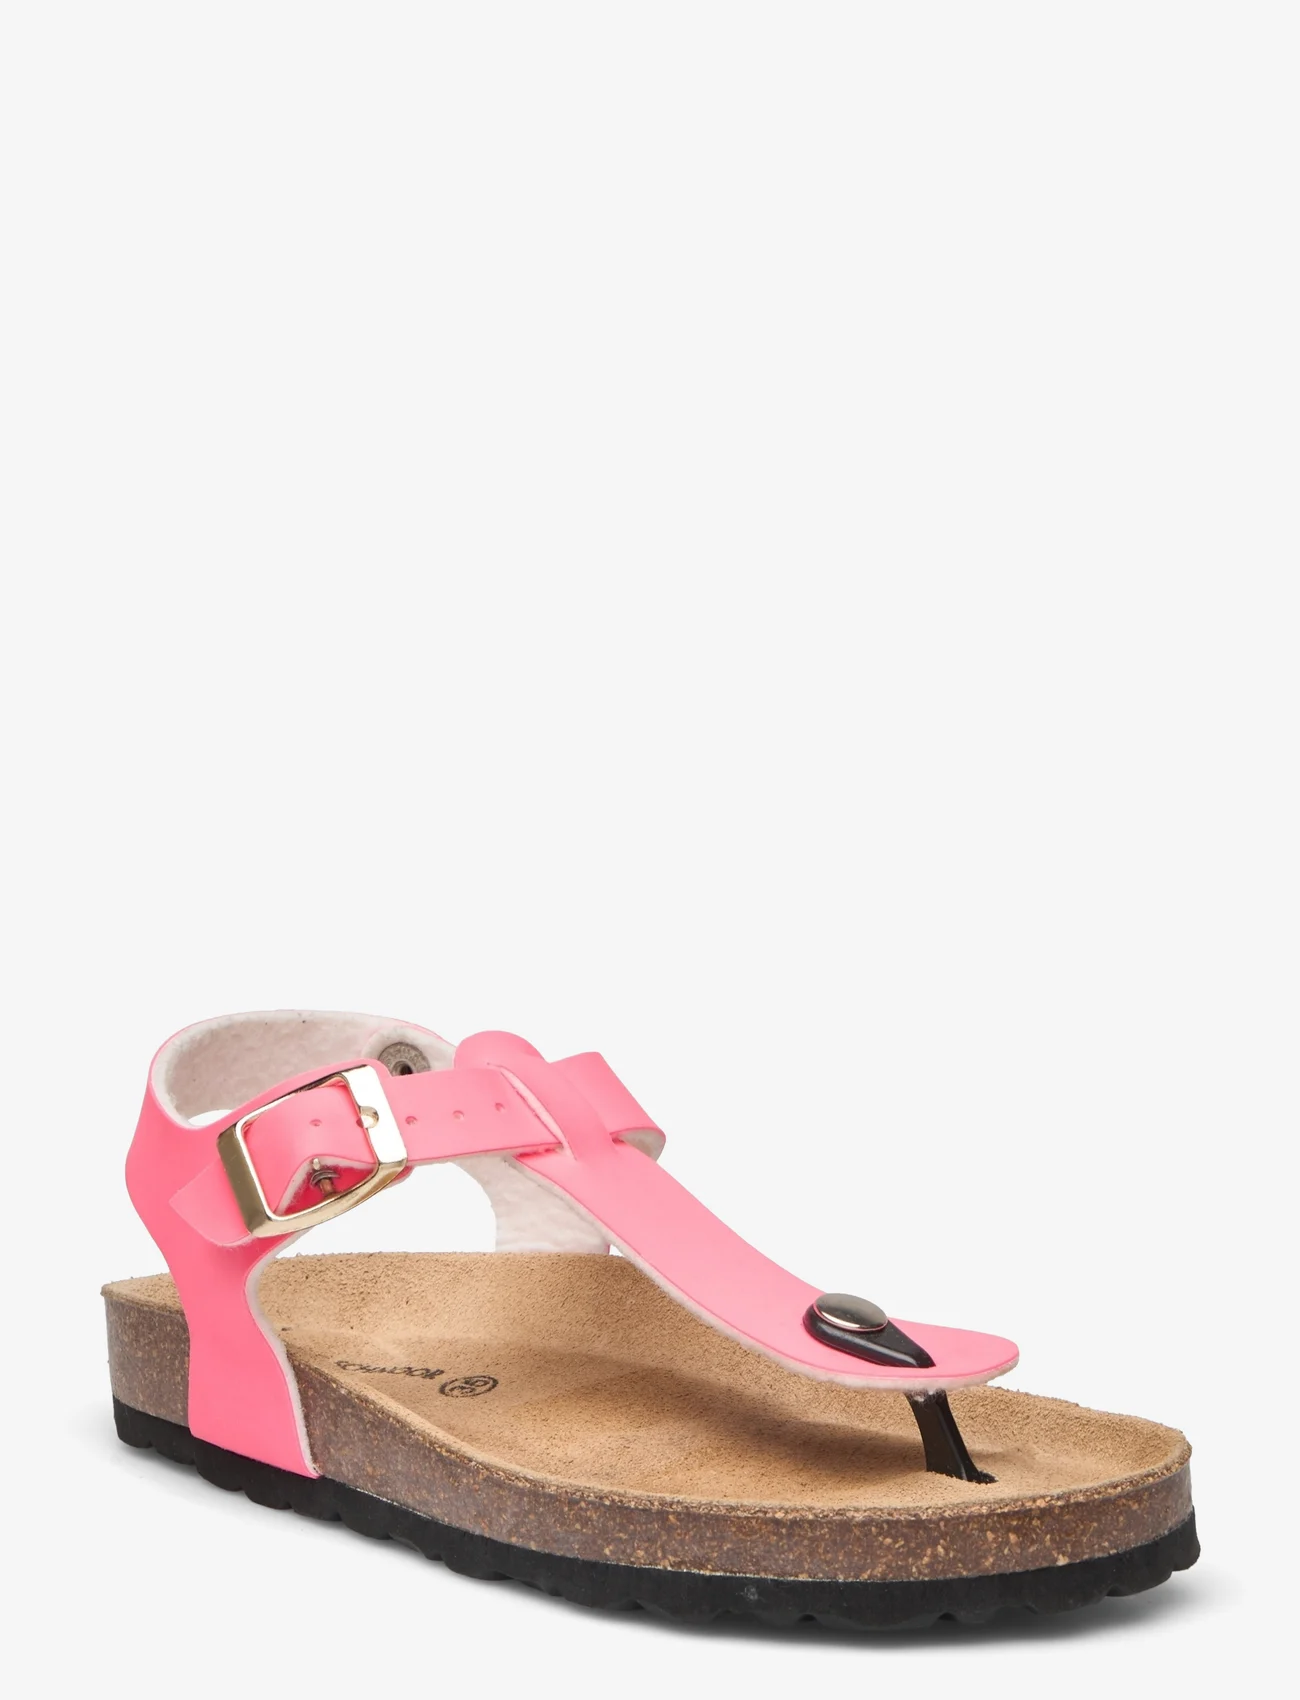 Sofie Schnoor Baby and Kids - Sandal lacquer - zomerkoopjes - coral pink - 0